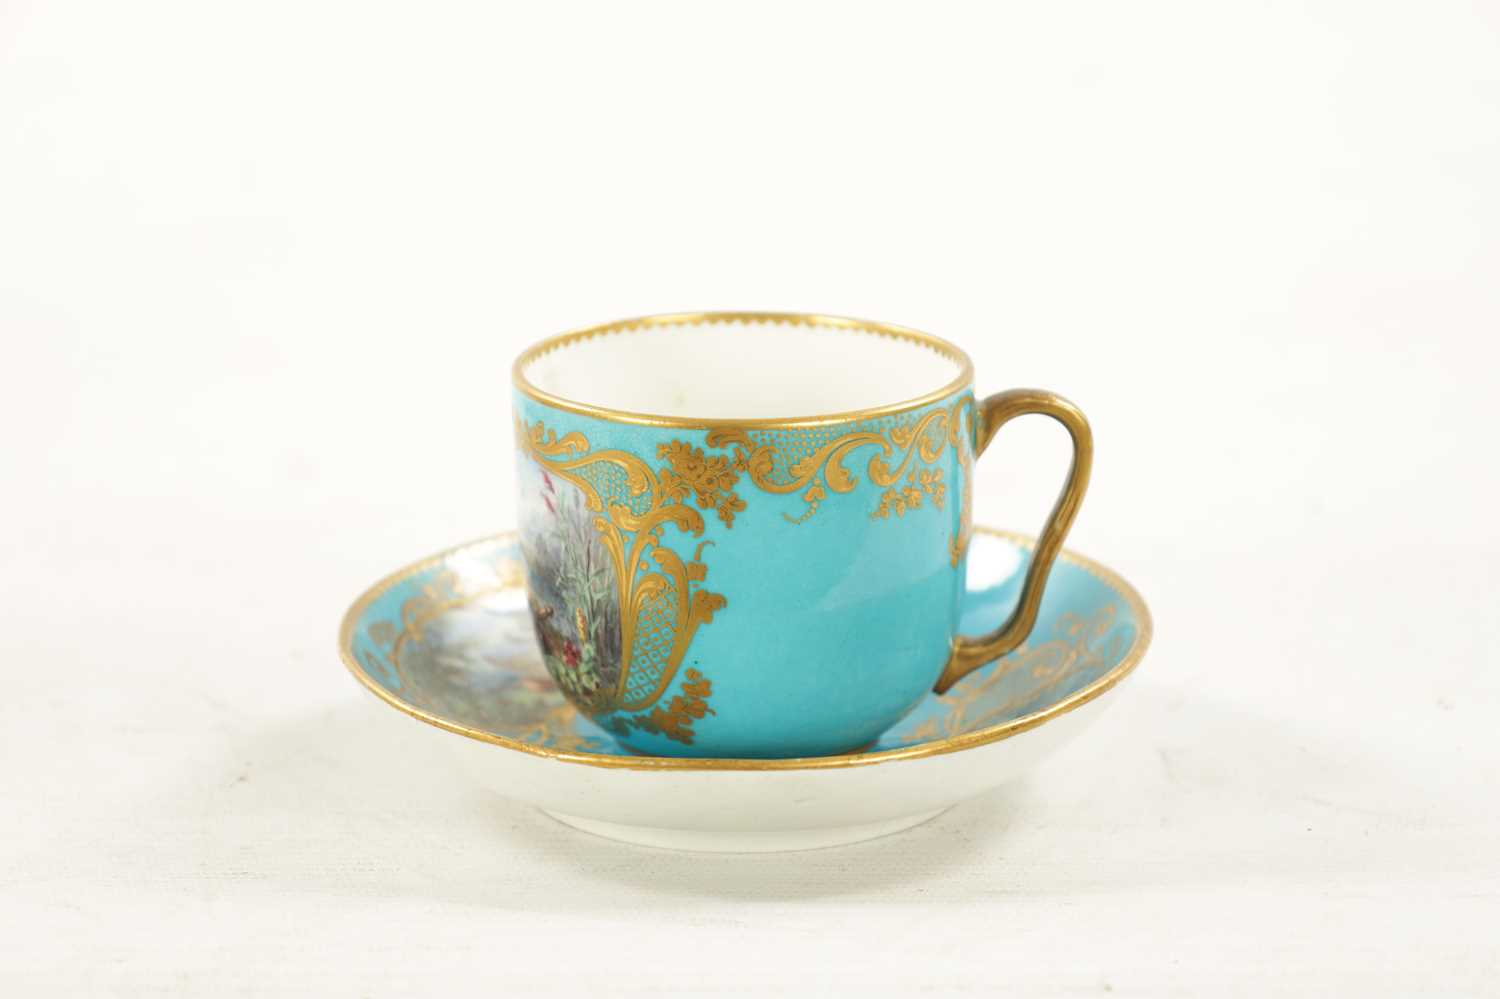 A FINE LATE 18TH / 19TH CENTURY SEVRES PORCELAIN CUP AND SAUCER - Image 2 of 13